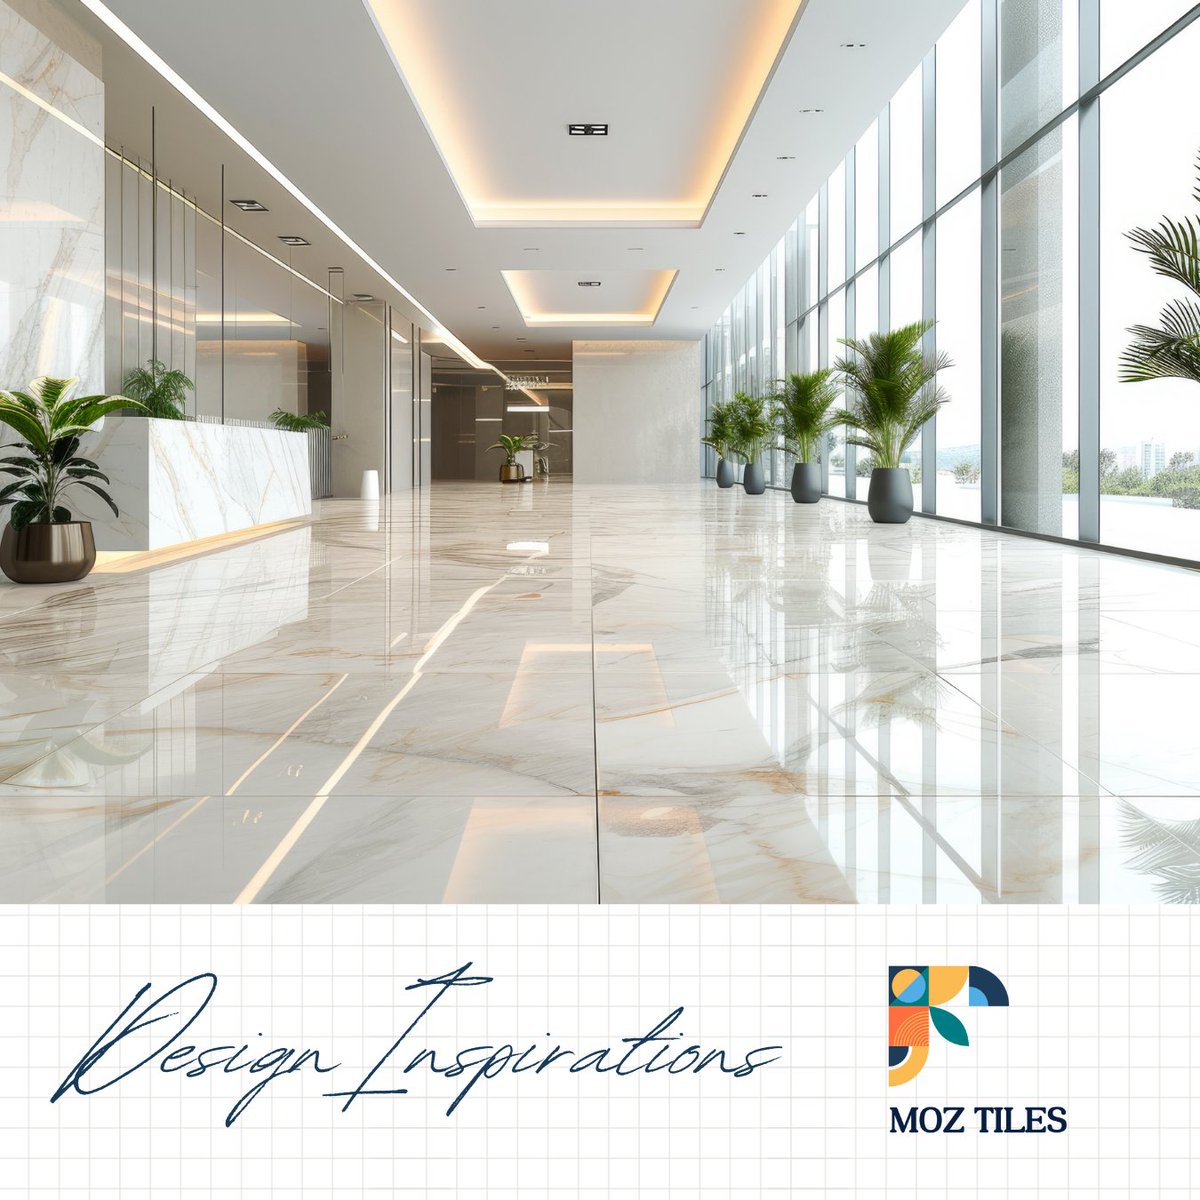 Want to get inspired with a tile/flooring design for your commercial or residential space? Check below! 😍 

63, Checketts Road, Leicester LE4 5ER | +441165073377 | moztiles@outlook.com

#moztiles #highquality  #tiles #luxuryflooring #commercialfloordesign #designinspirations